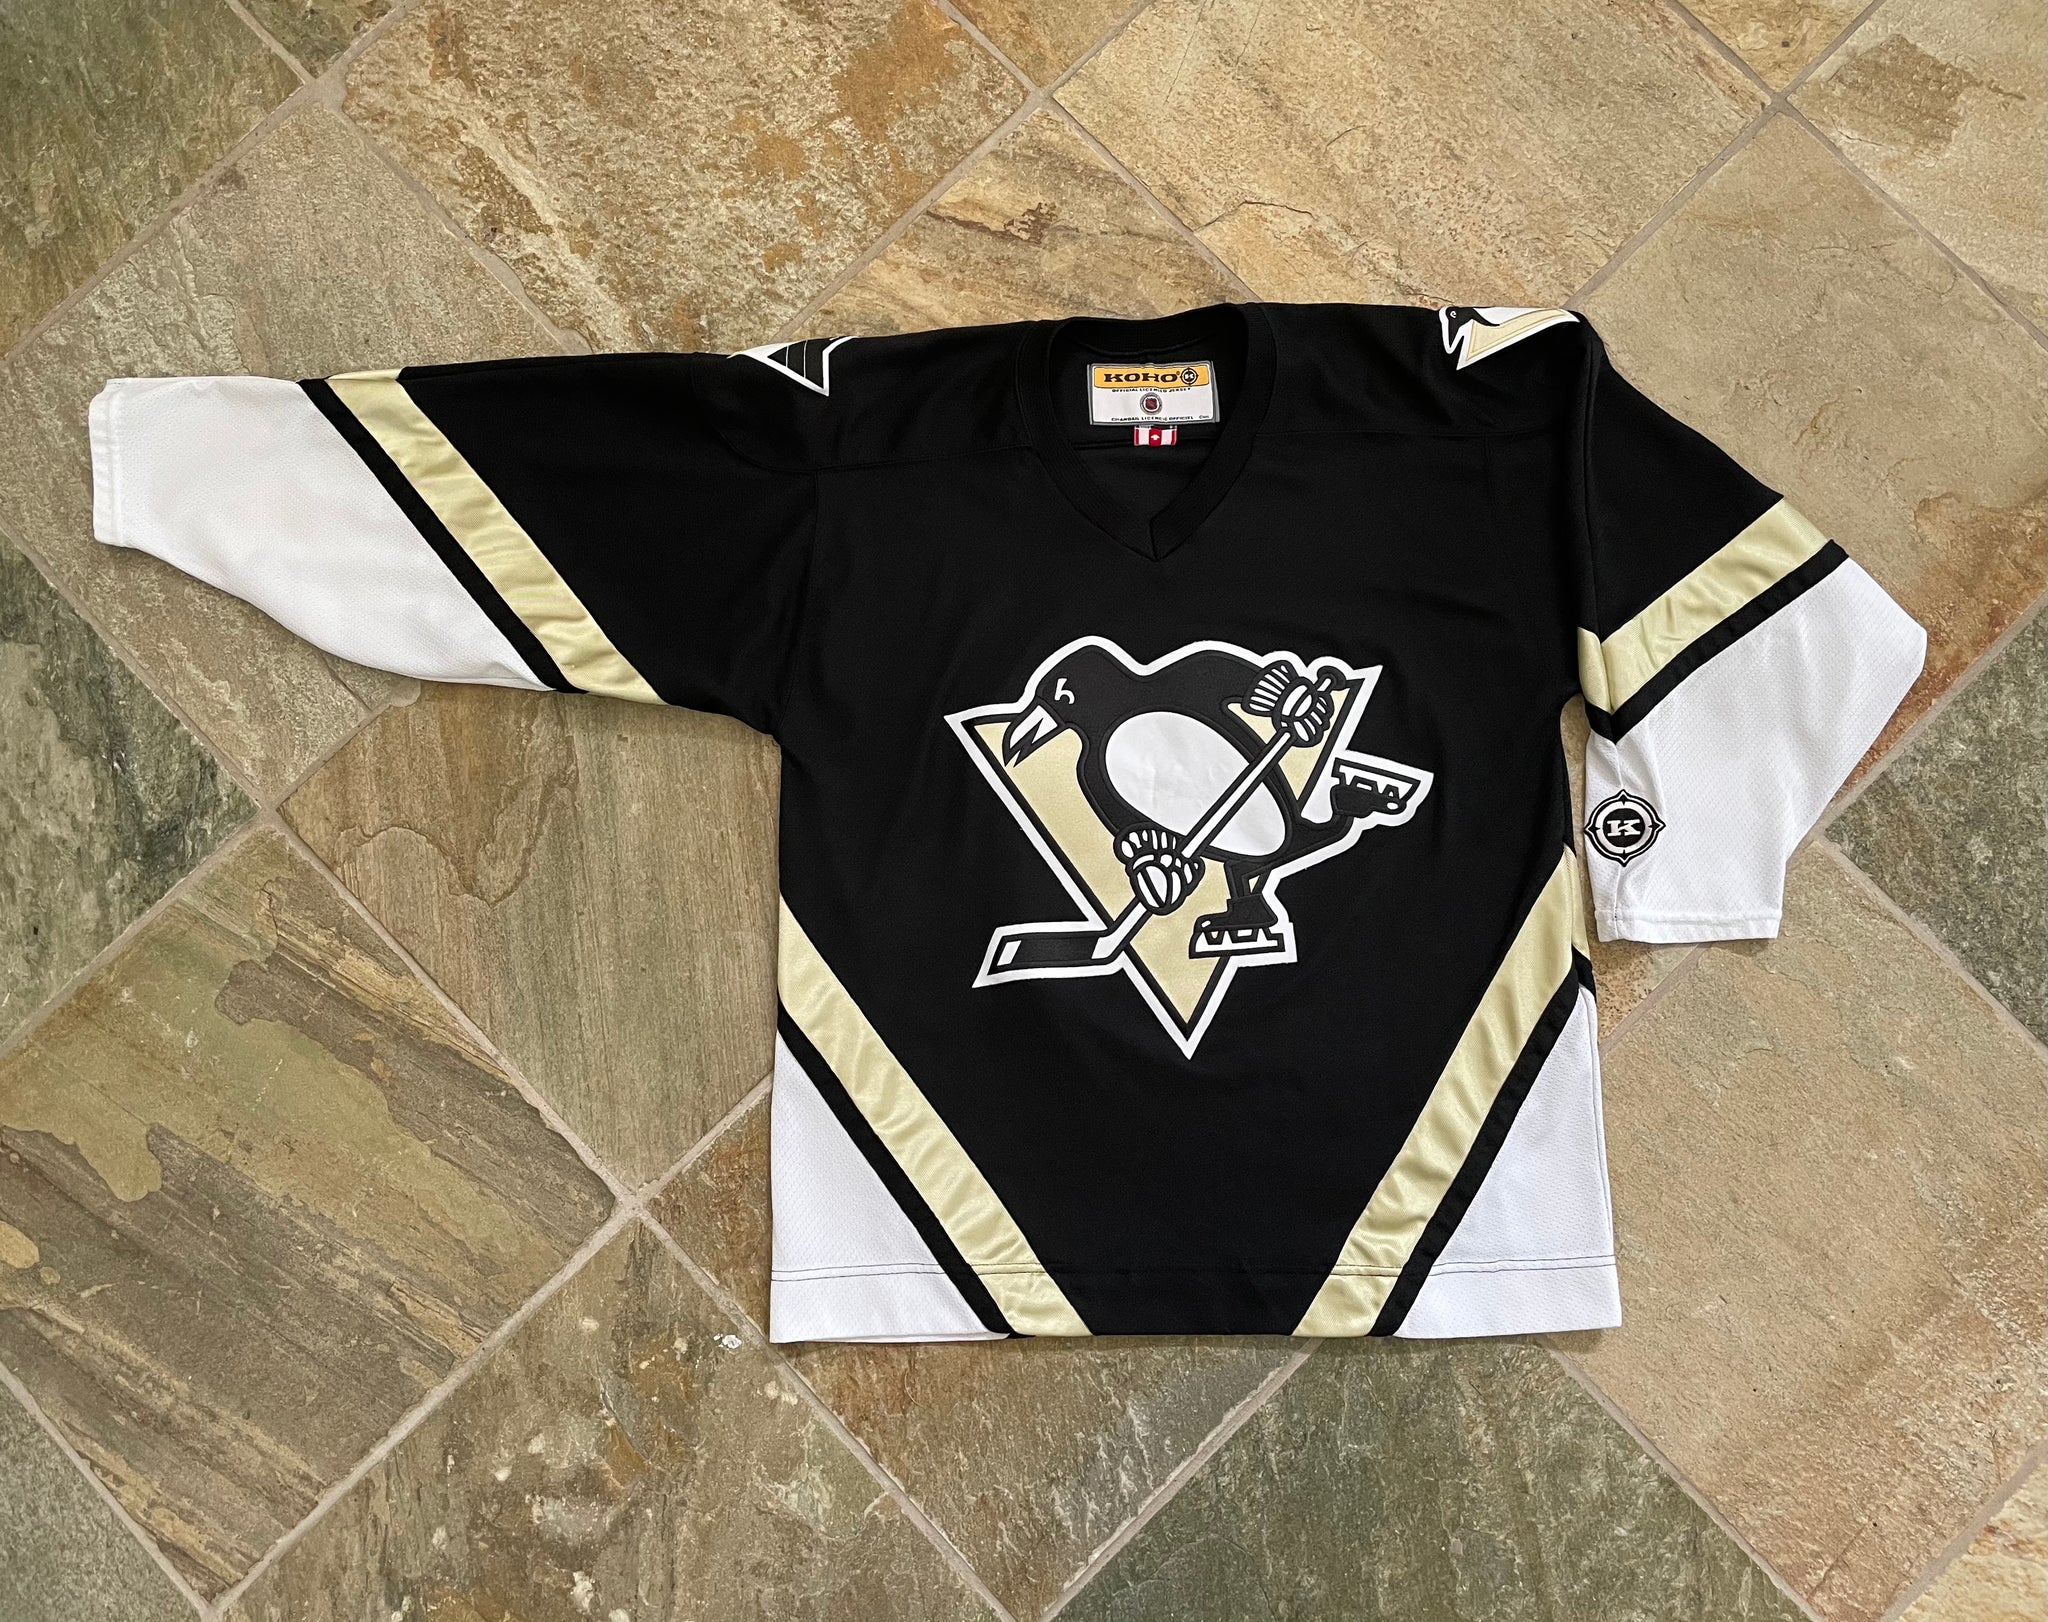 Mario Lemieux Jersey - The Sizes Range From Adults to Kids. - Pittsburgh  Penguins Store